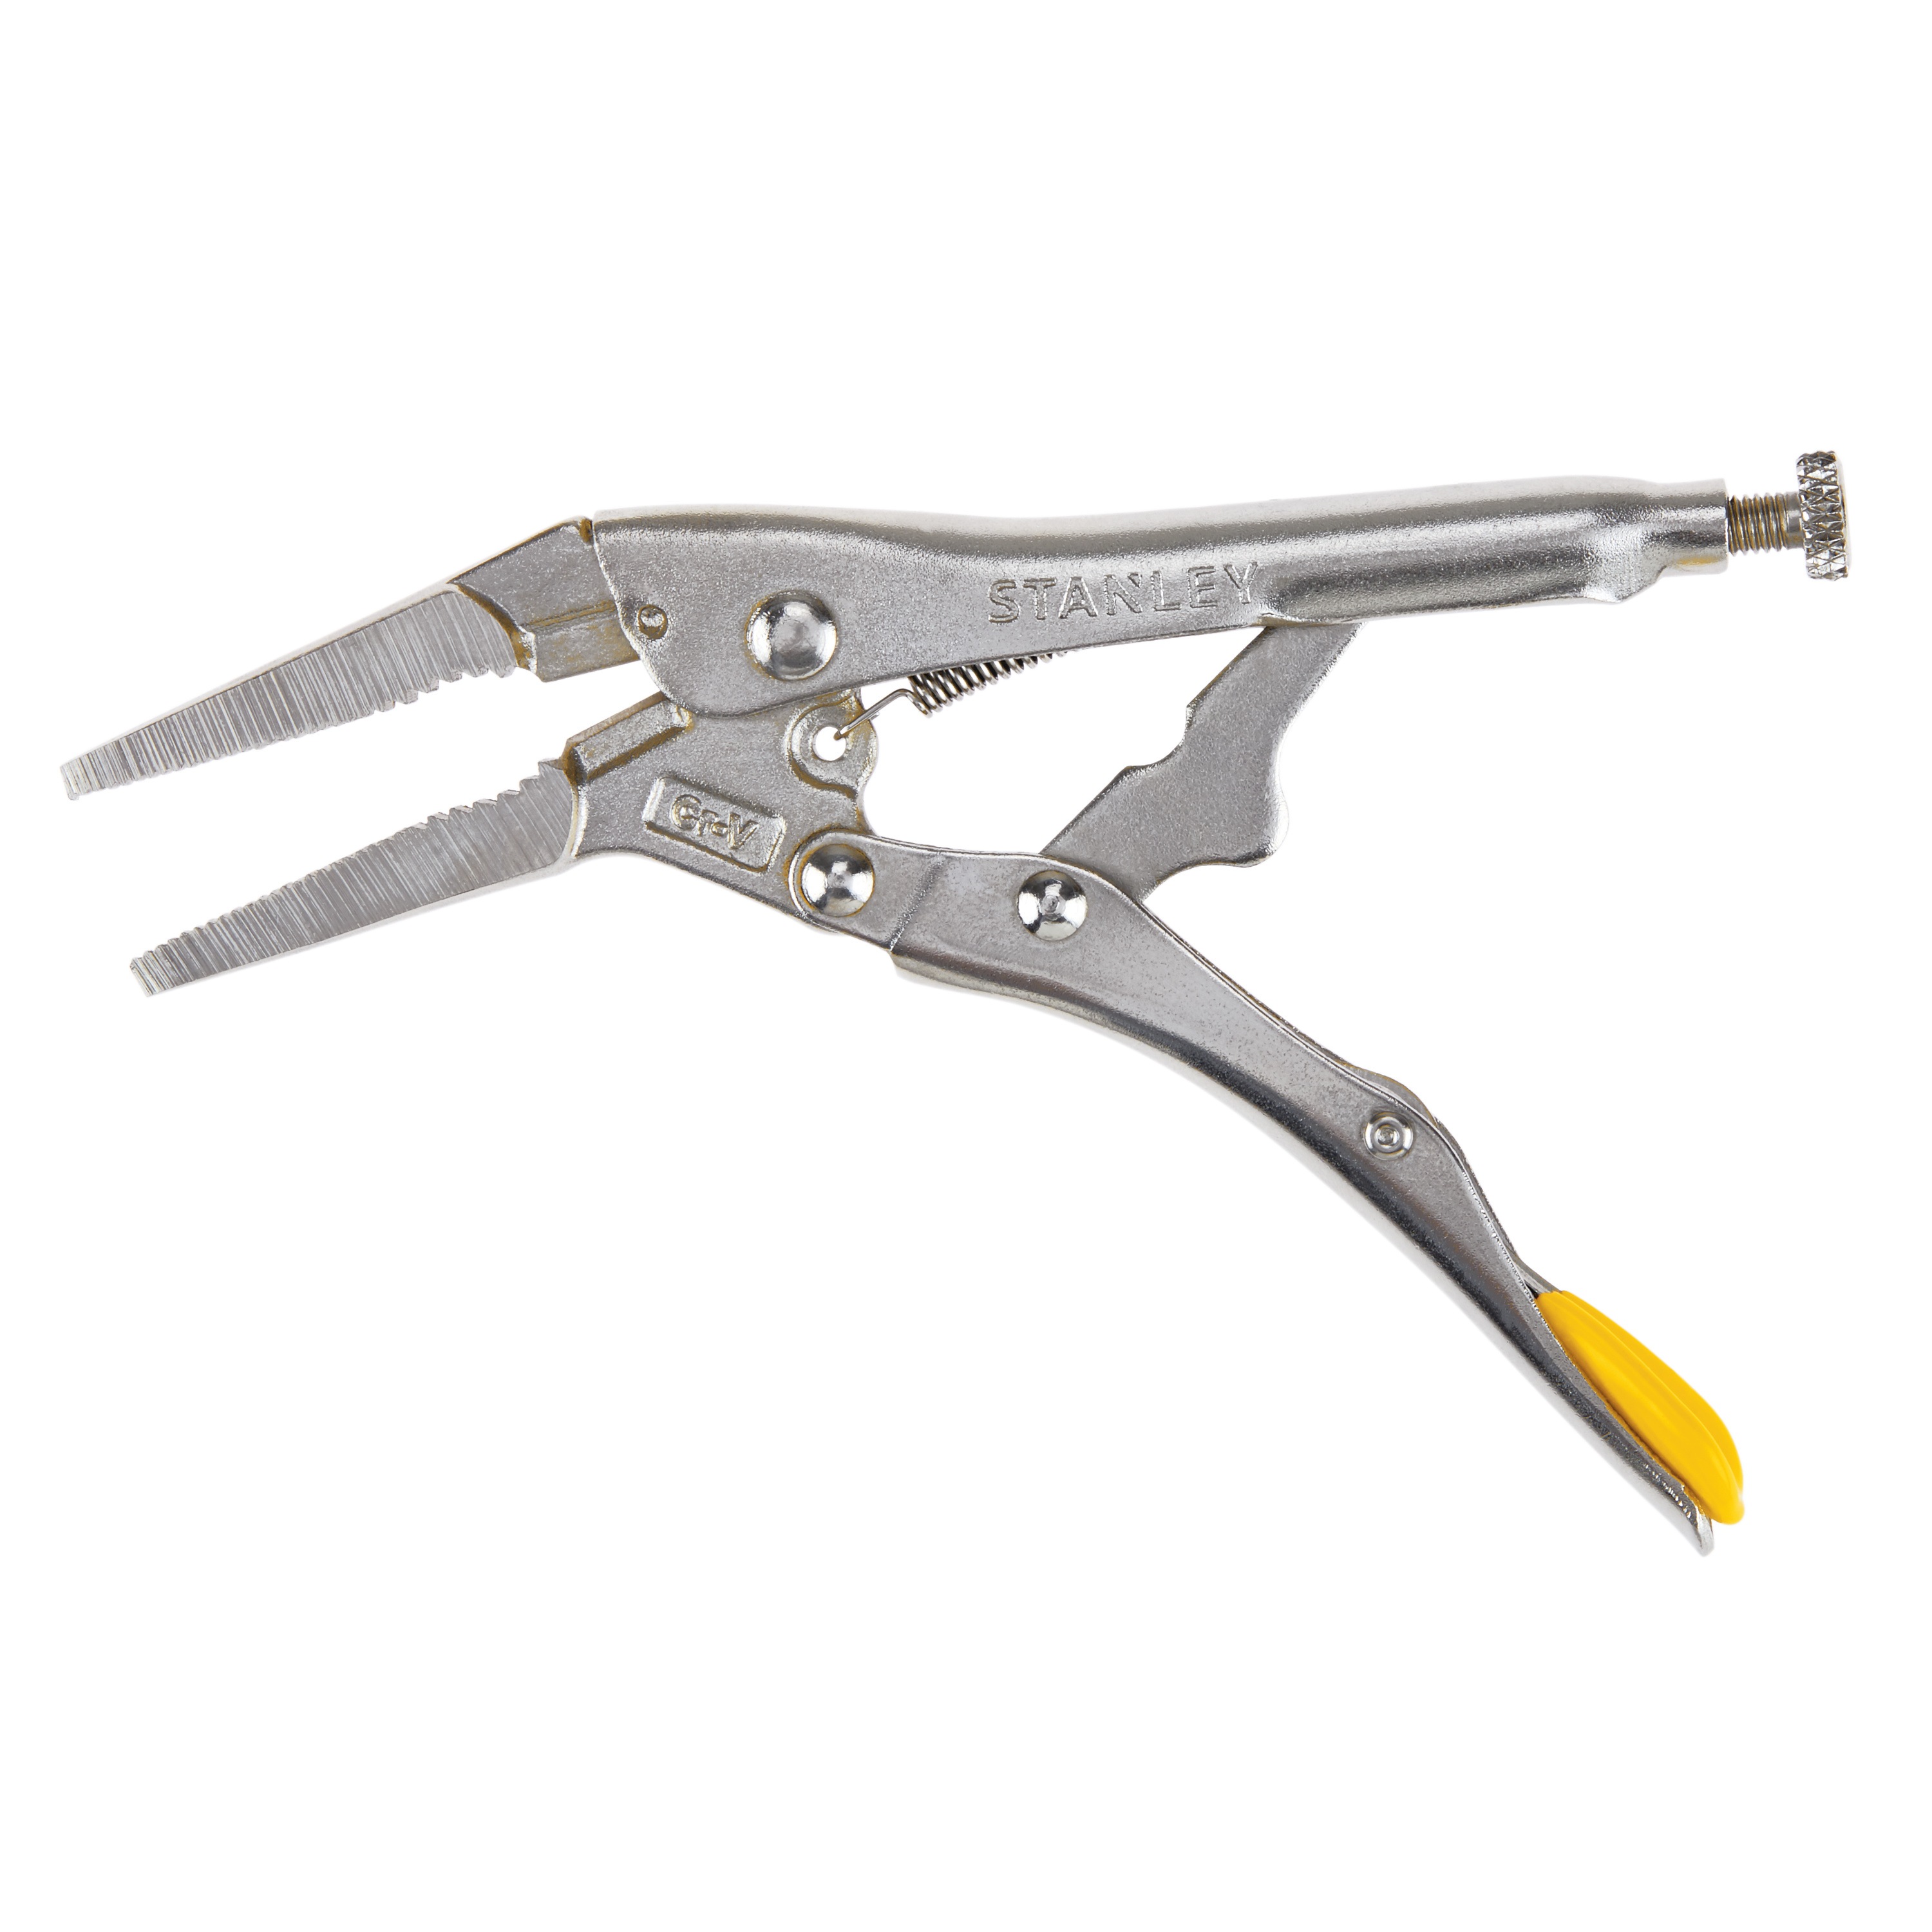 Stanley Tools - 675 in Long Nose Locking Pliers - STHT84404